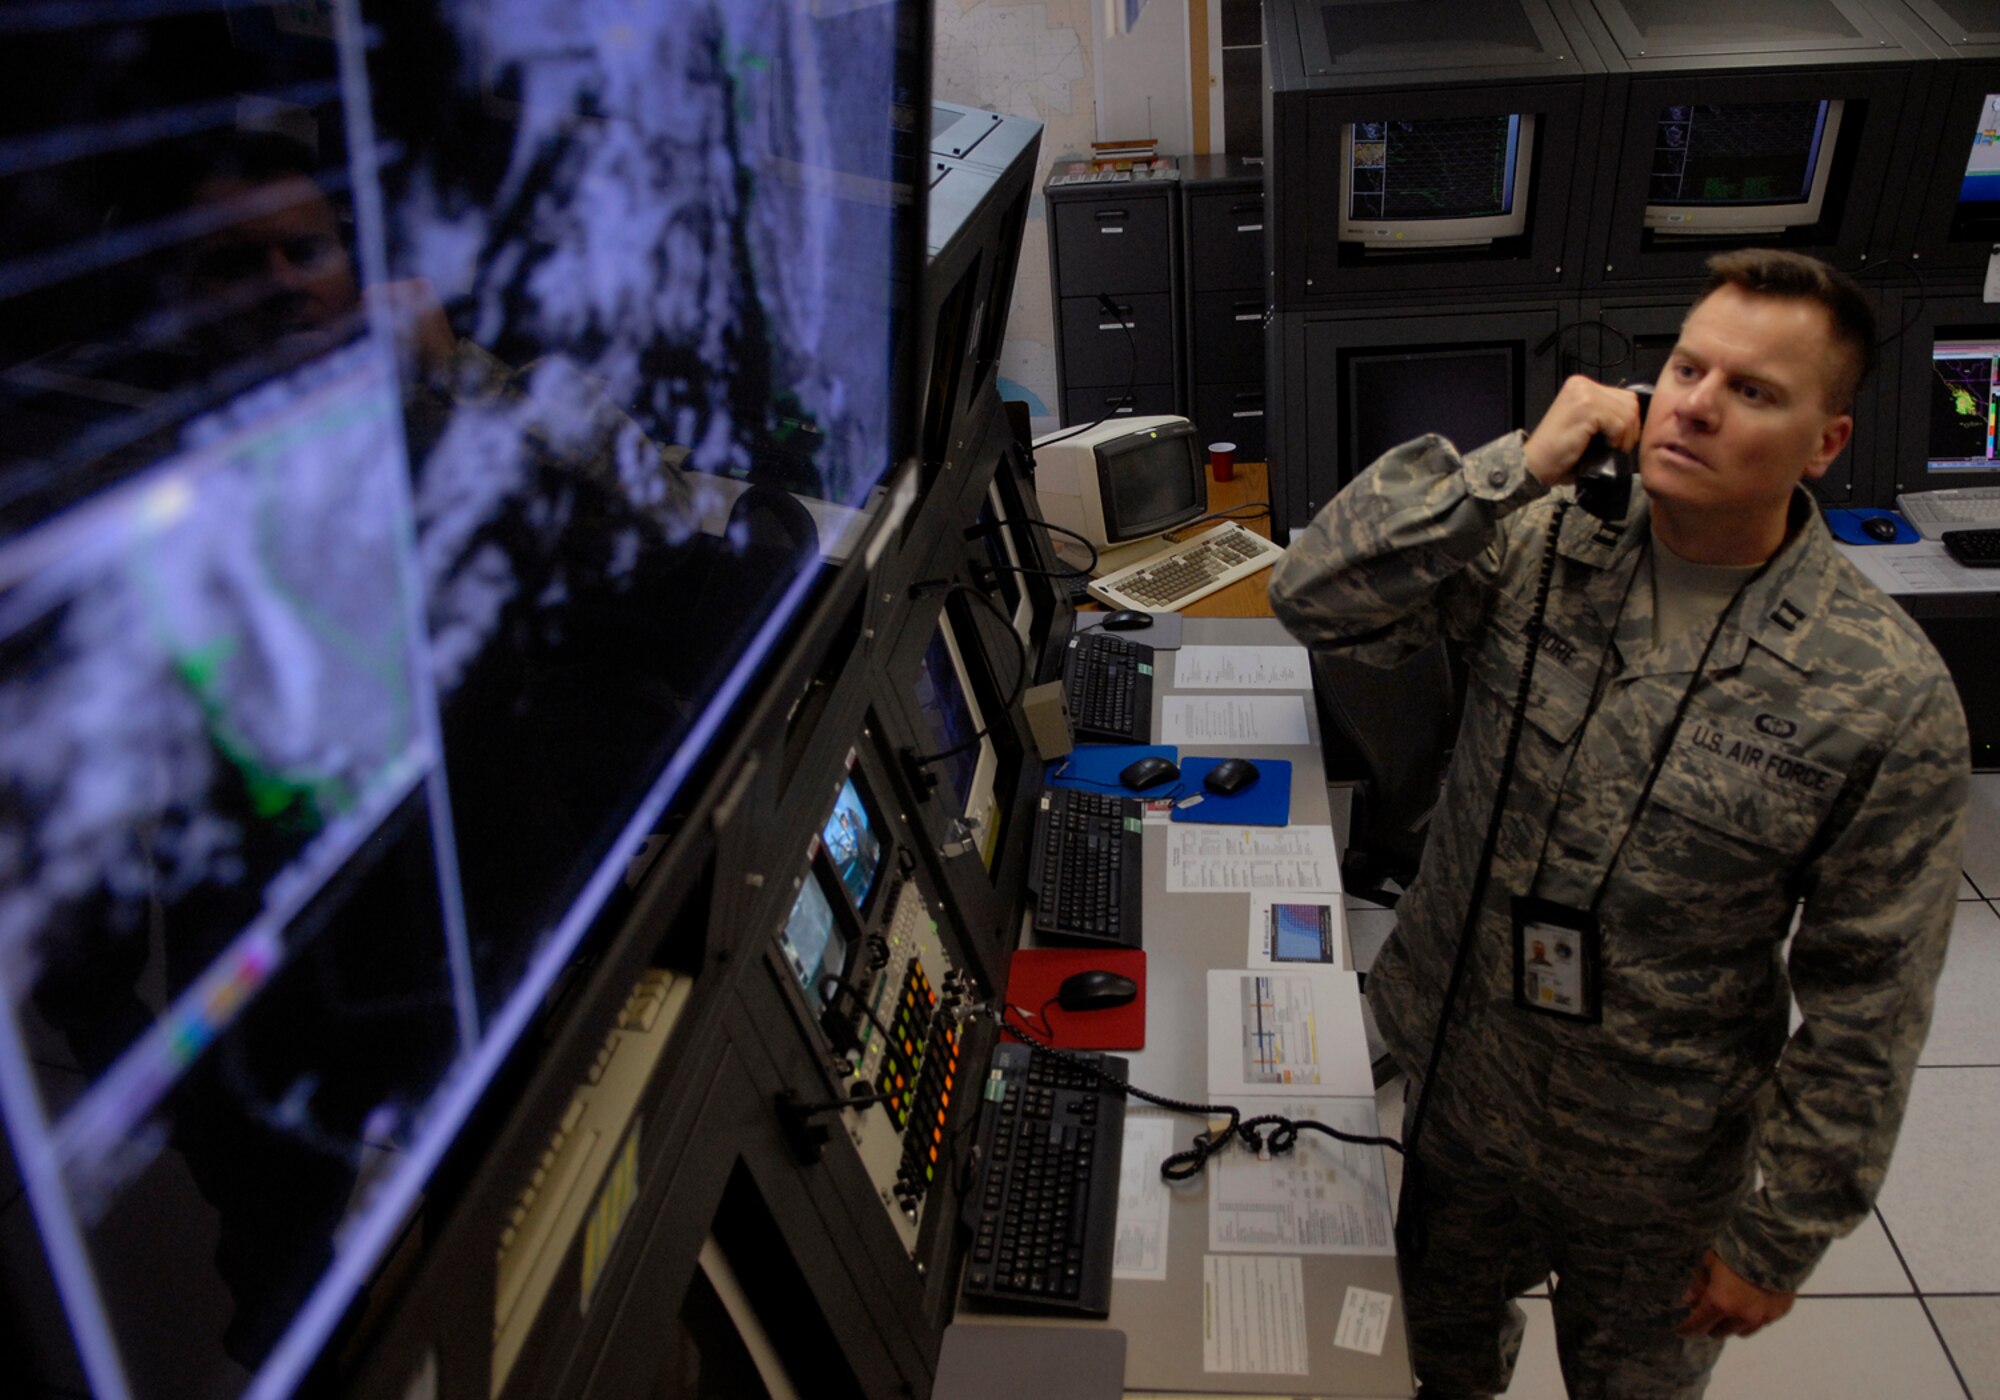 VANDENBERG AIR FORCE BASE, Calif. -- Capt. Howard Moore, 30th Weather Squadron officer, studies a screen of weather information here Feb. 25. (U.S. Air Force photo / Senior Airman Christopher Hubenthal)